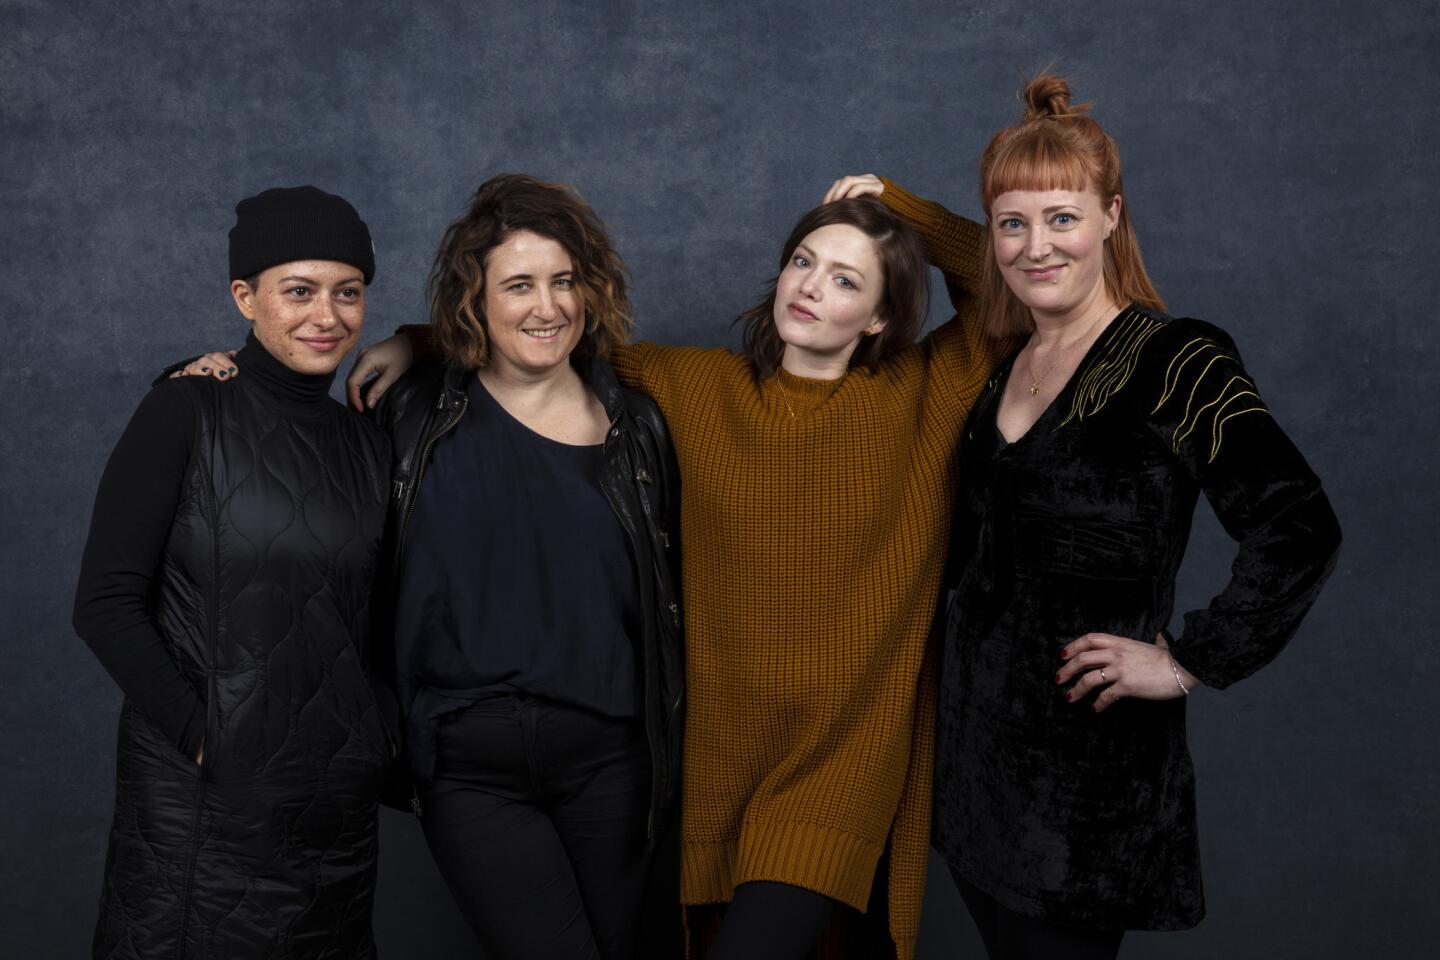 Actor Alia Shawkat, director Sophie Hyde, actor Holliday Grainger and writer Emma Jane Unsworth from the film "Animals."